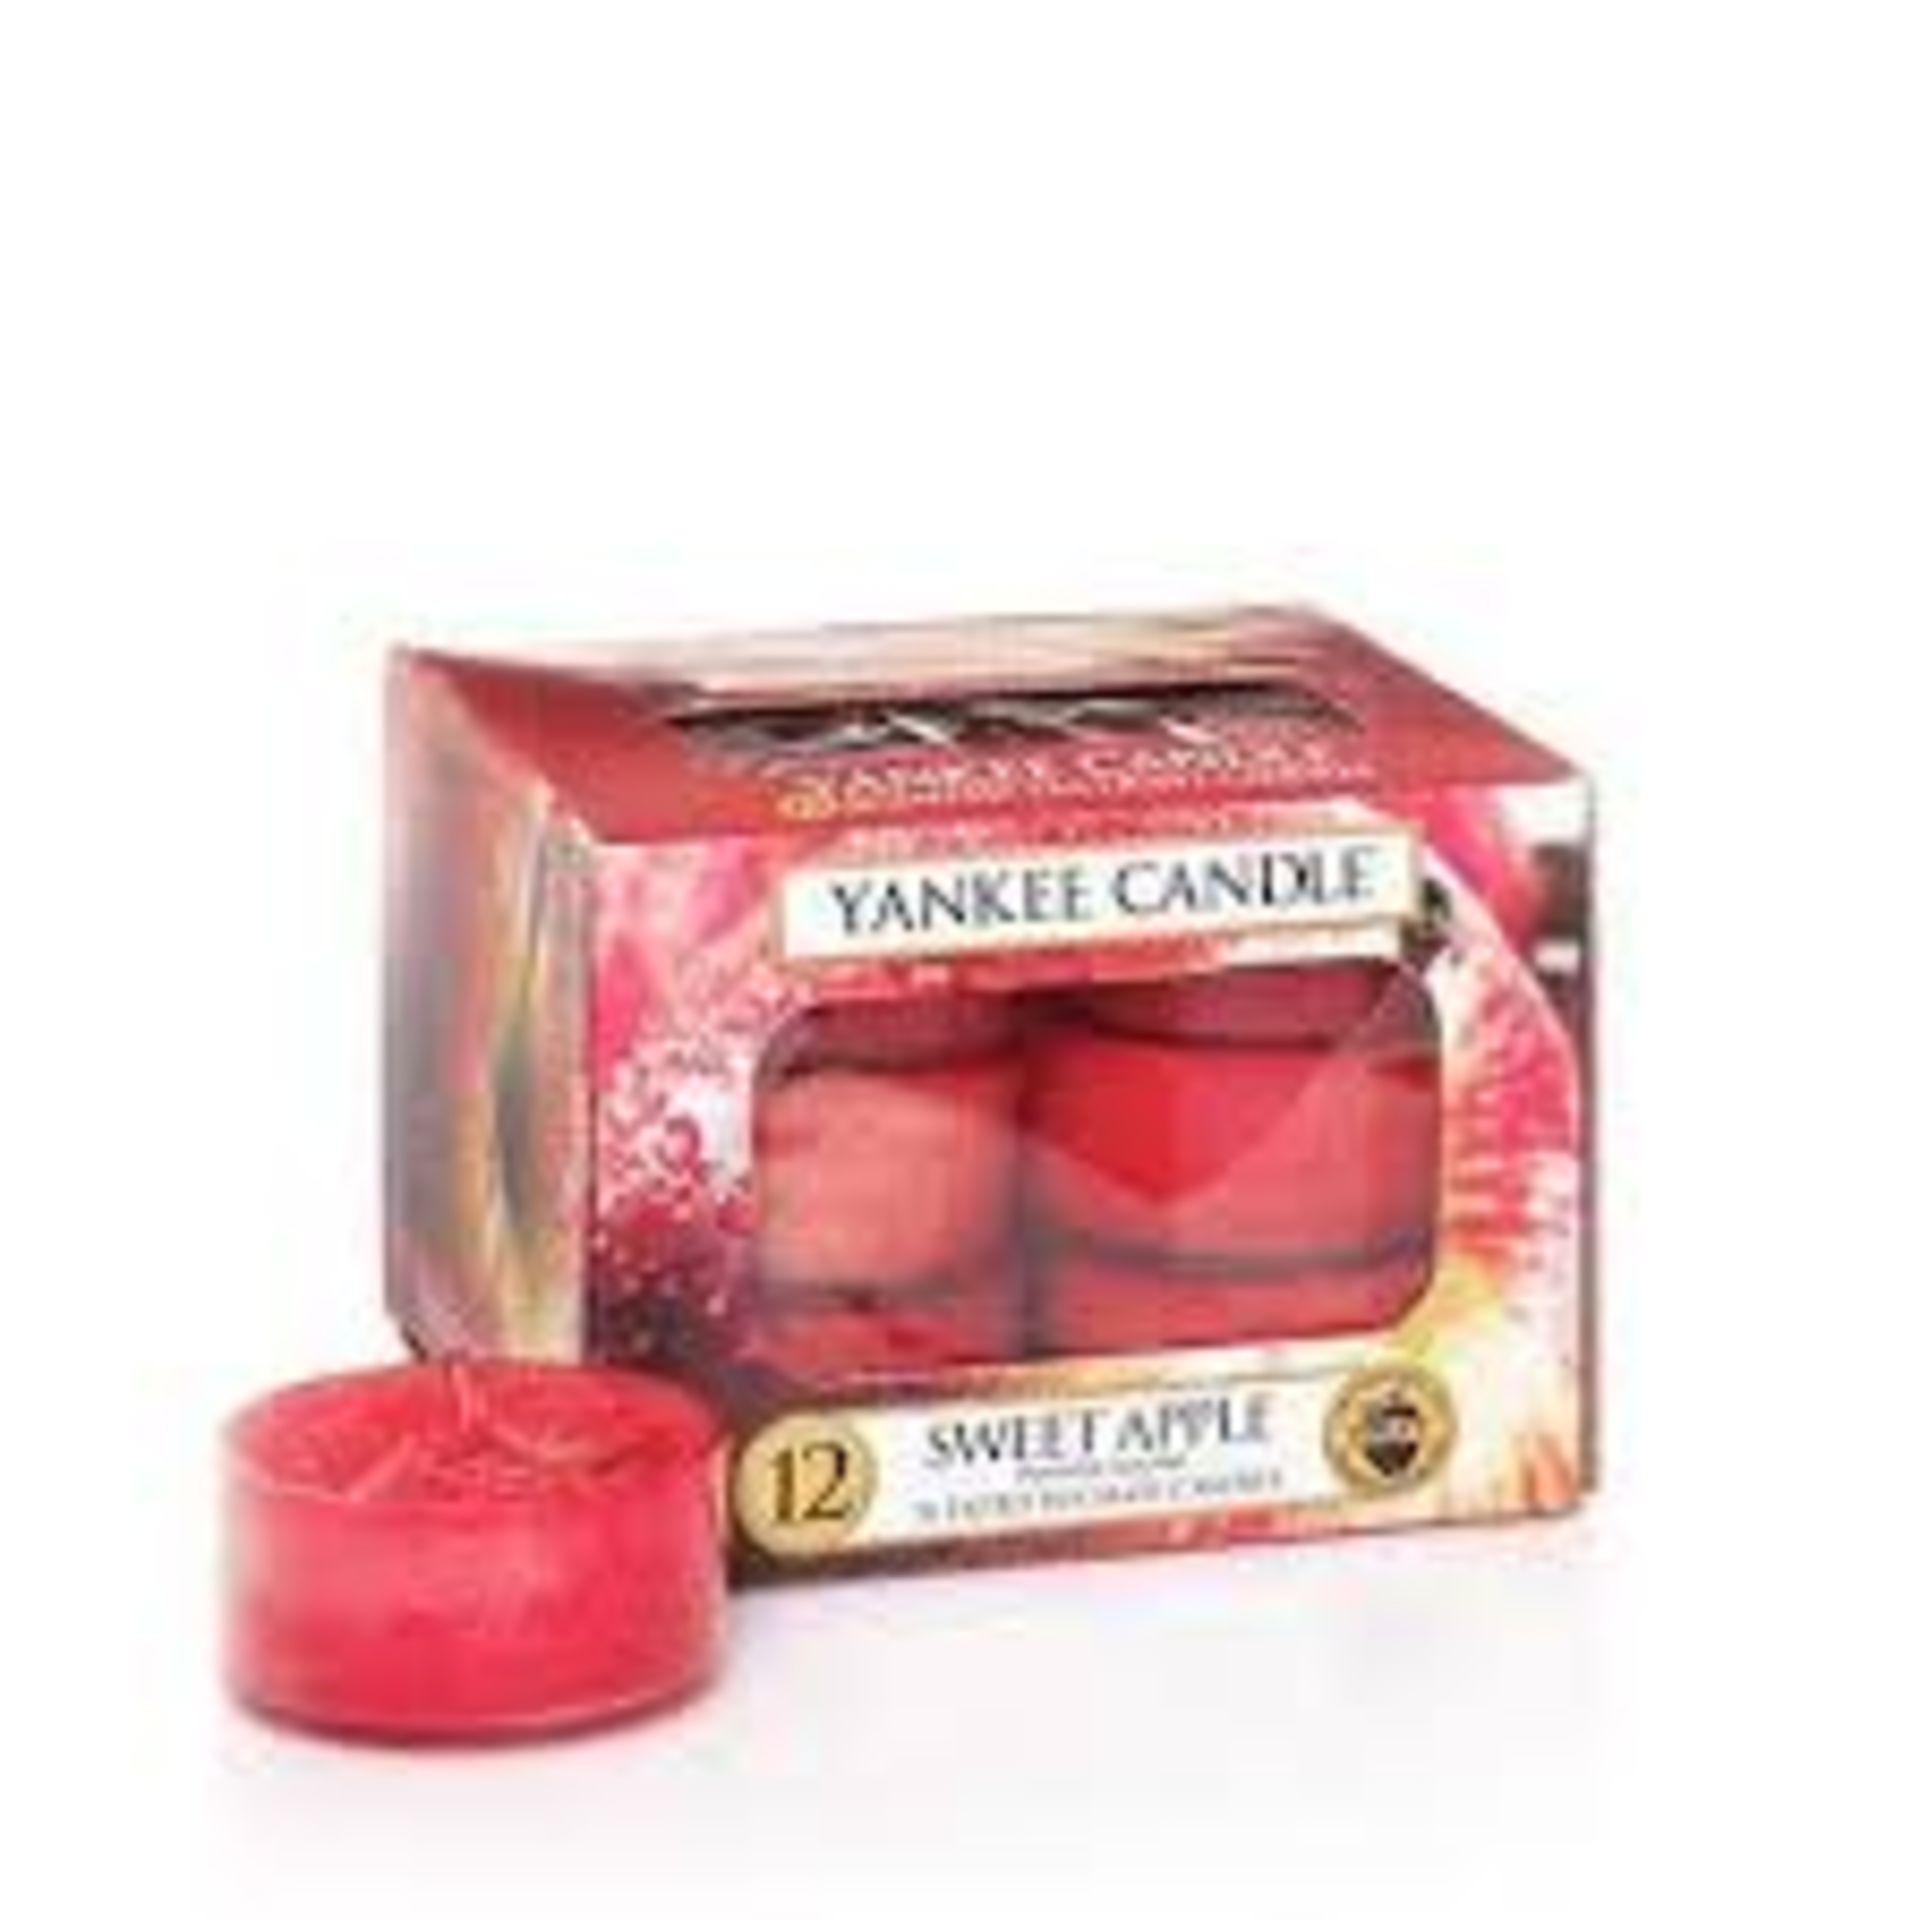 V Brand New 12 Yankee Candle Scented Tea Light Candles Sweet Apple eBay Price £6.99